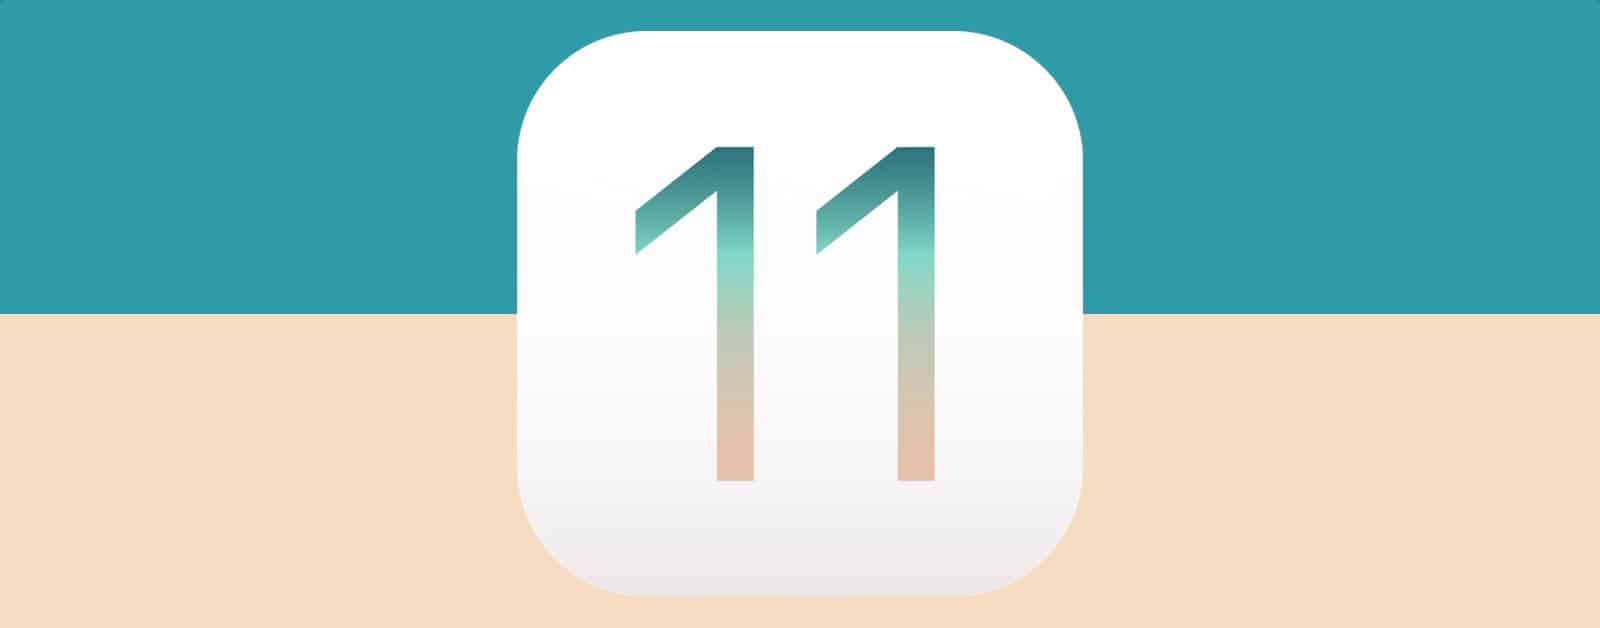 iOS 11: Top 5 New Photo Features Apple Announced